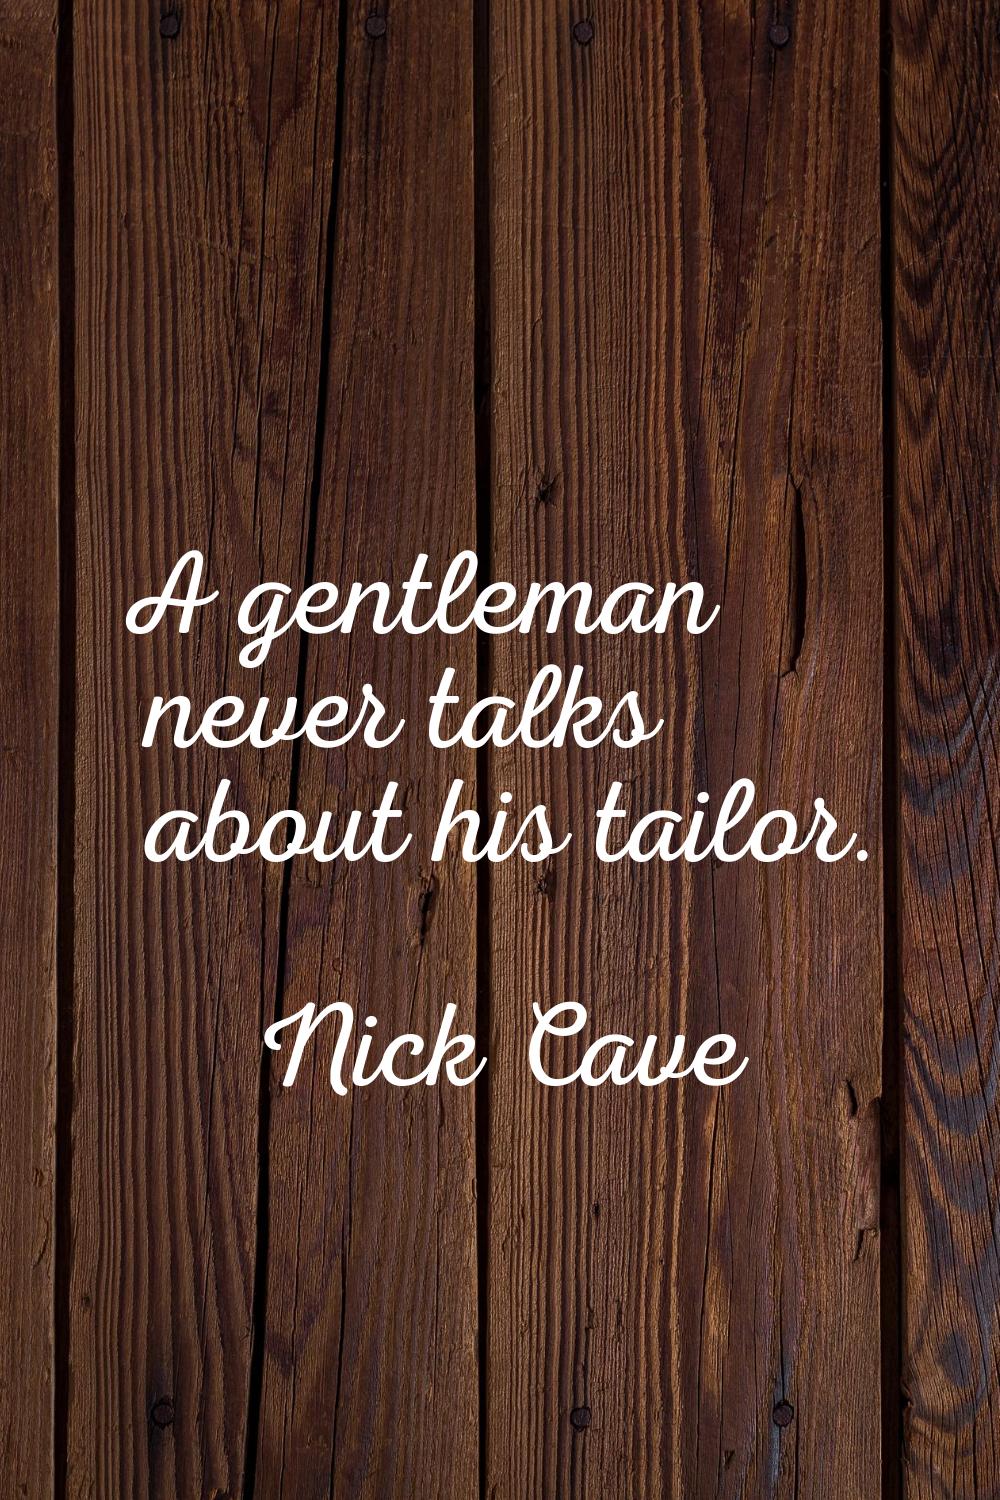 A gentleman never talks about his tailor.